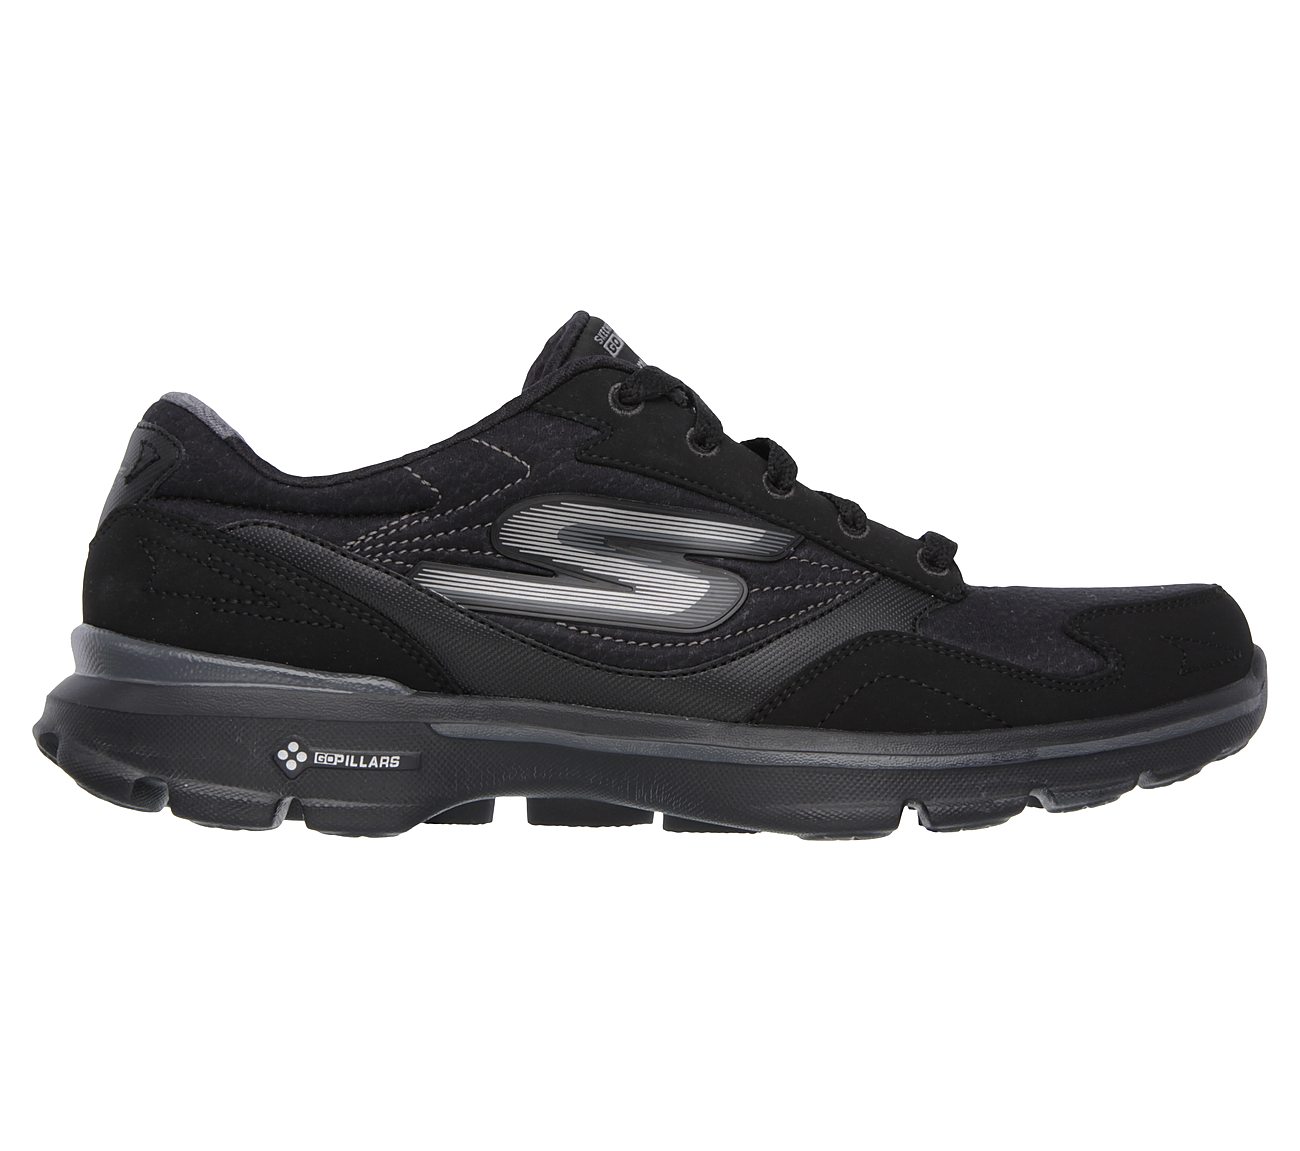 skechers go walk 3 fitknit lace up